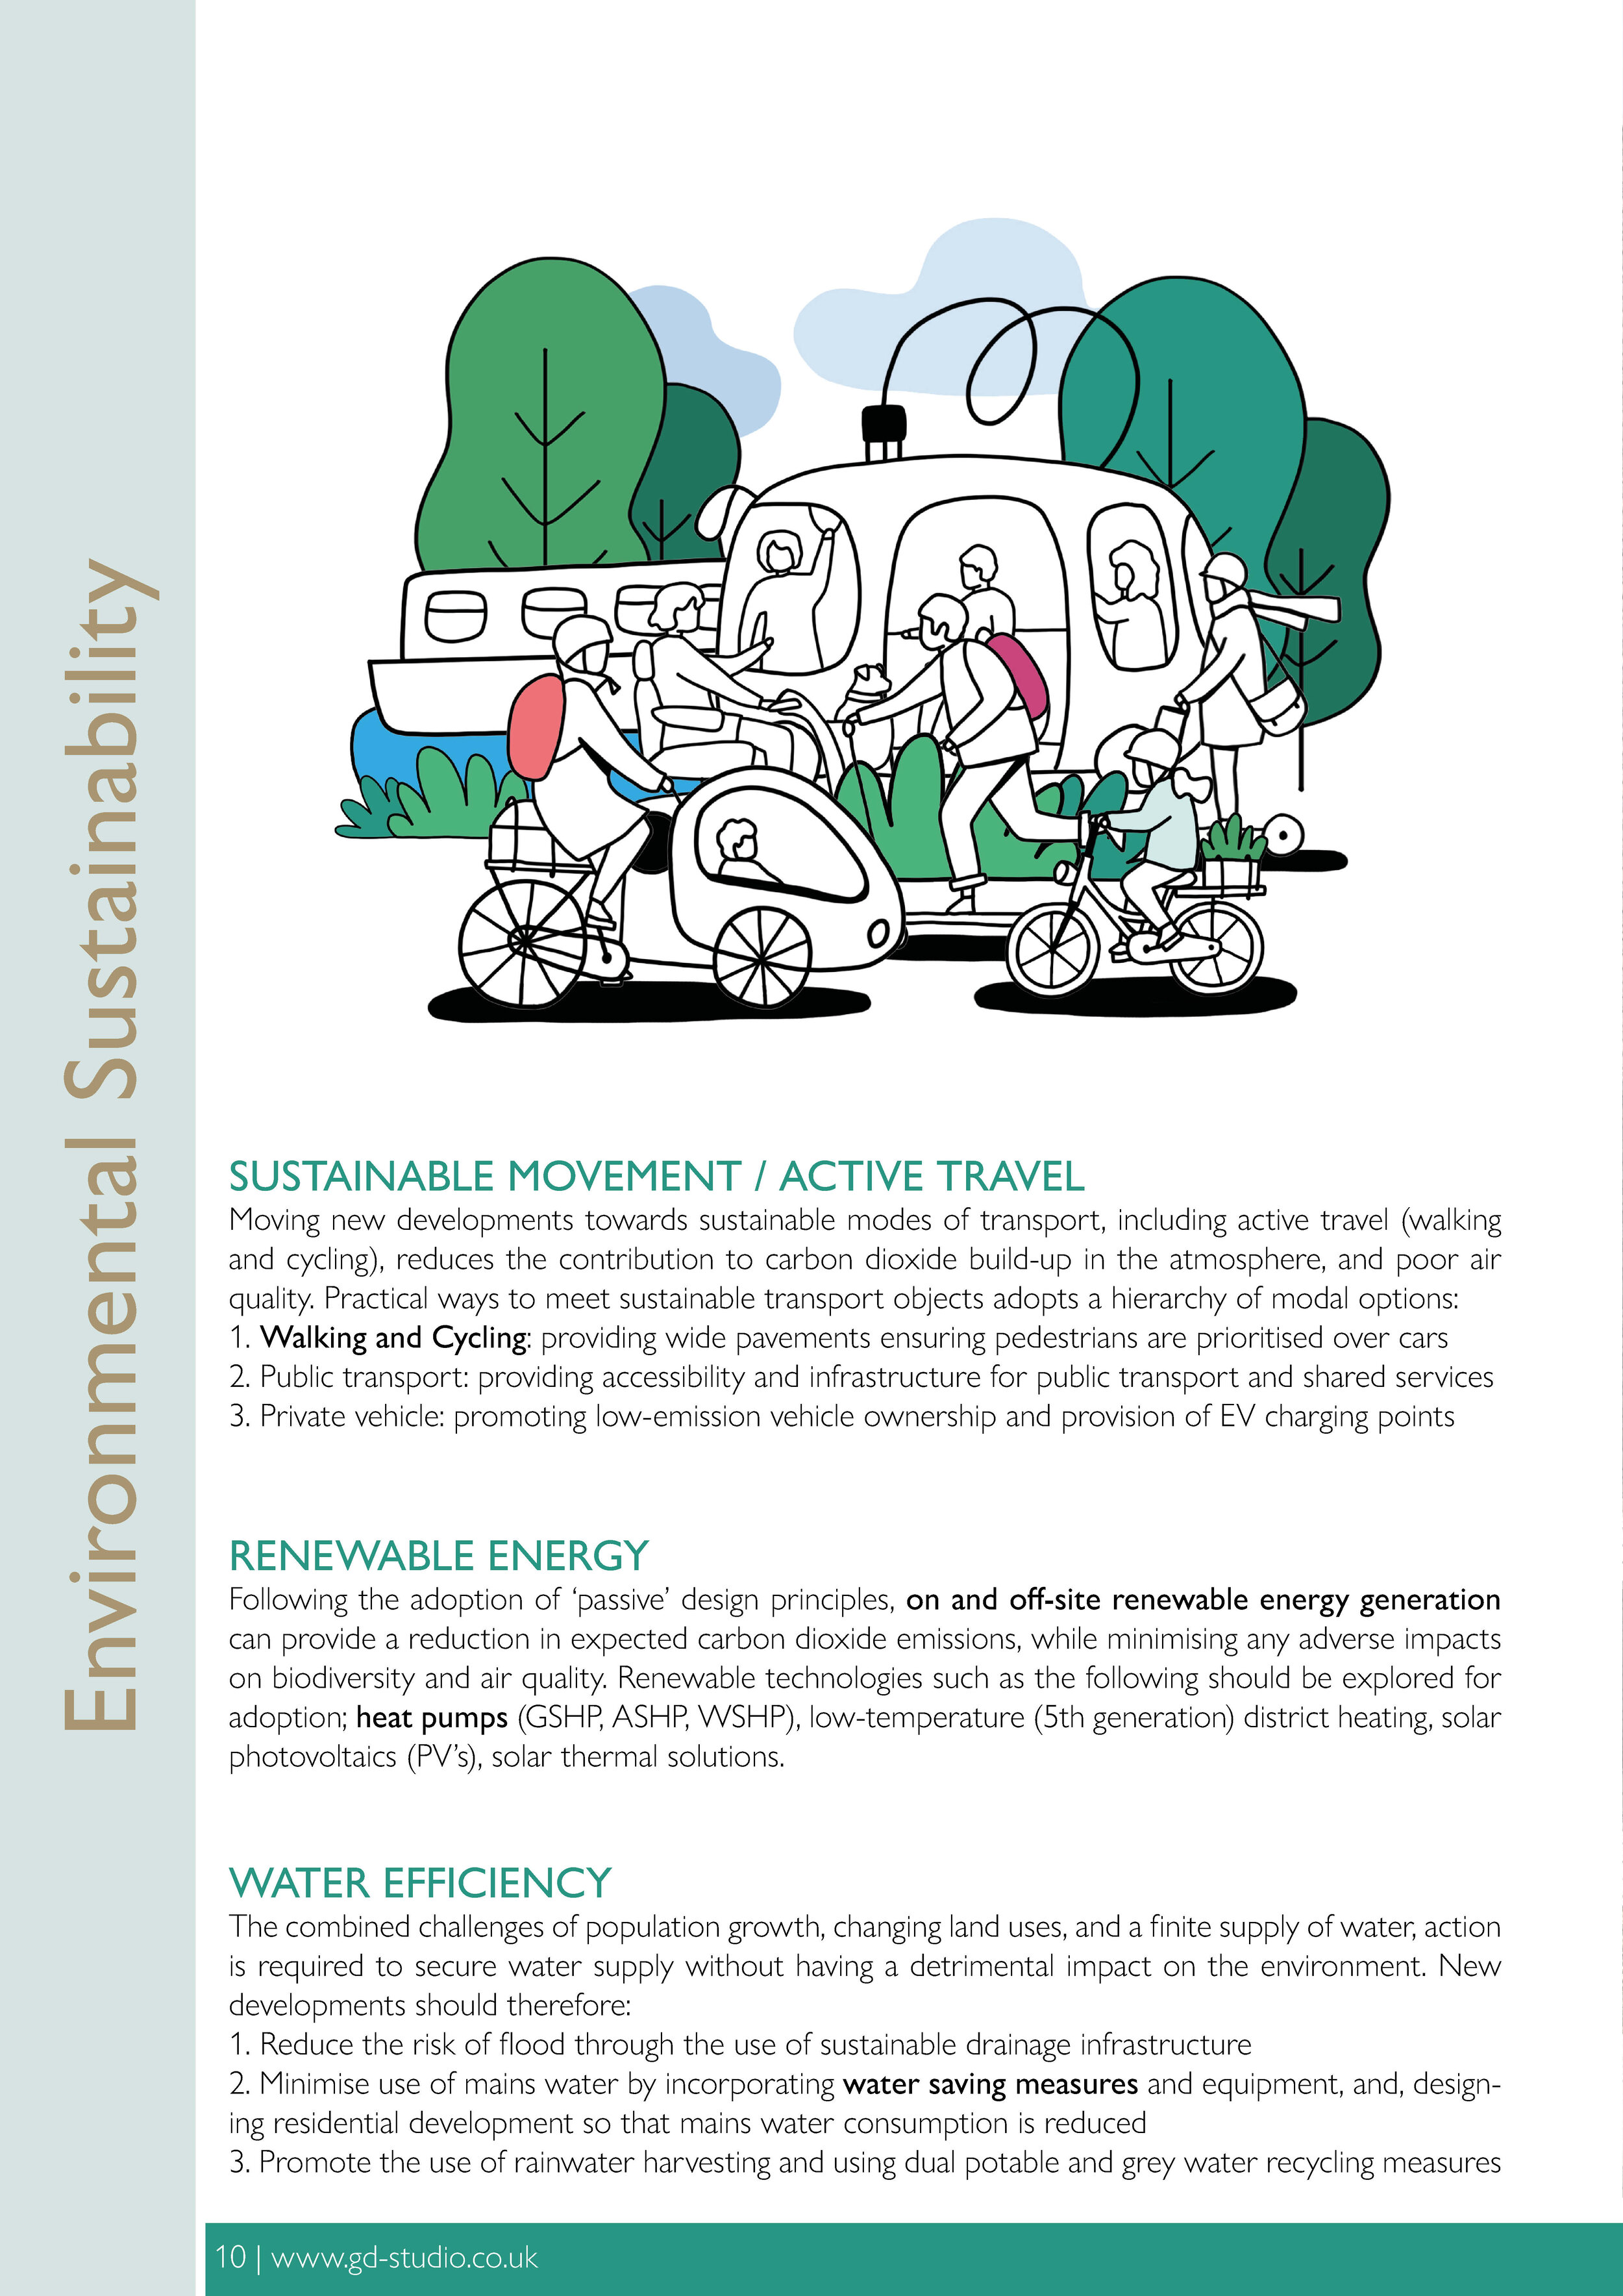 GDS Clients Guide to Sustainability-10.jpg